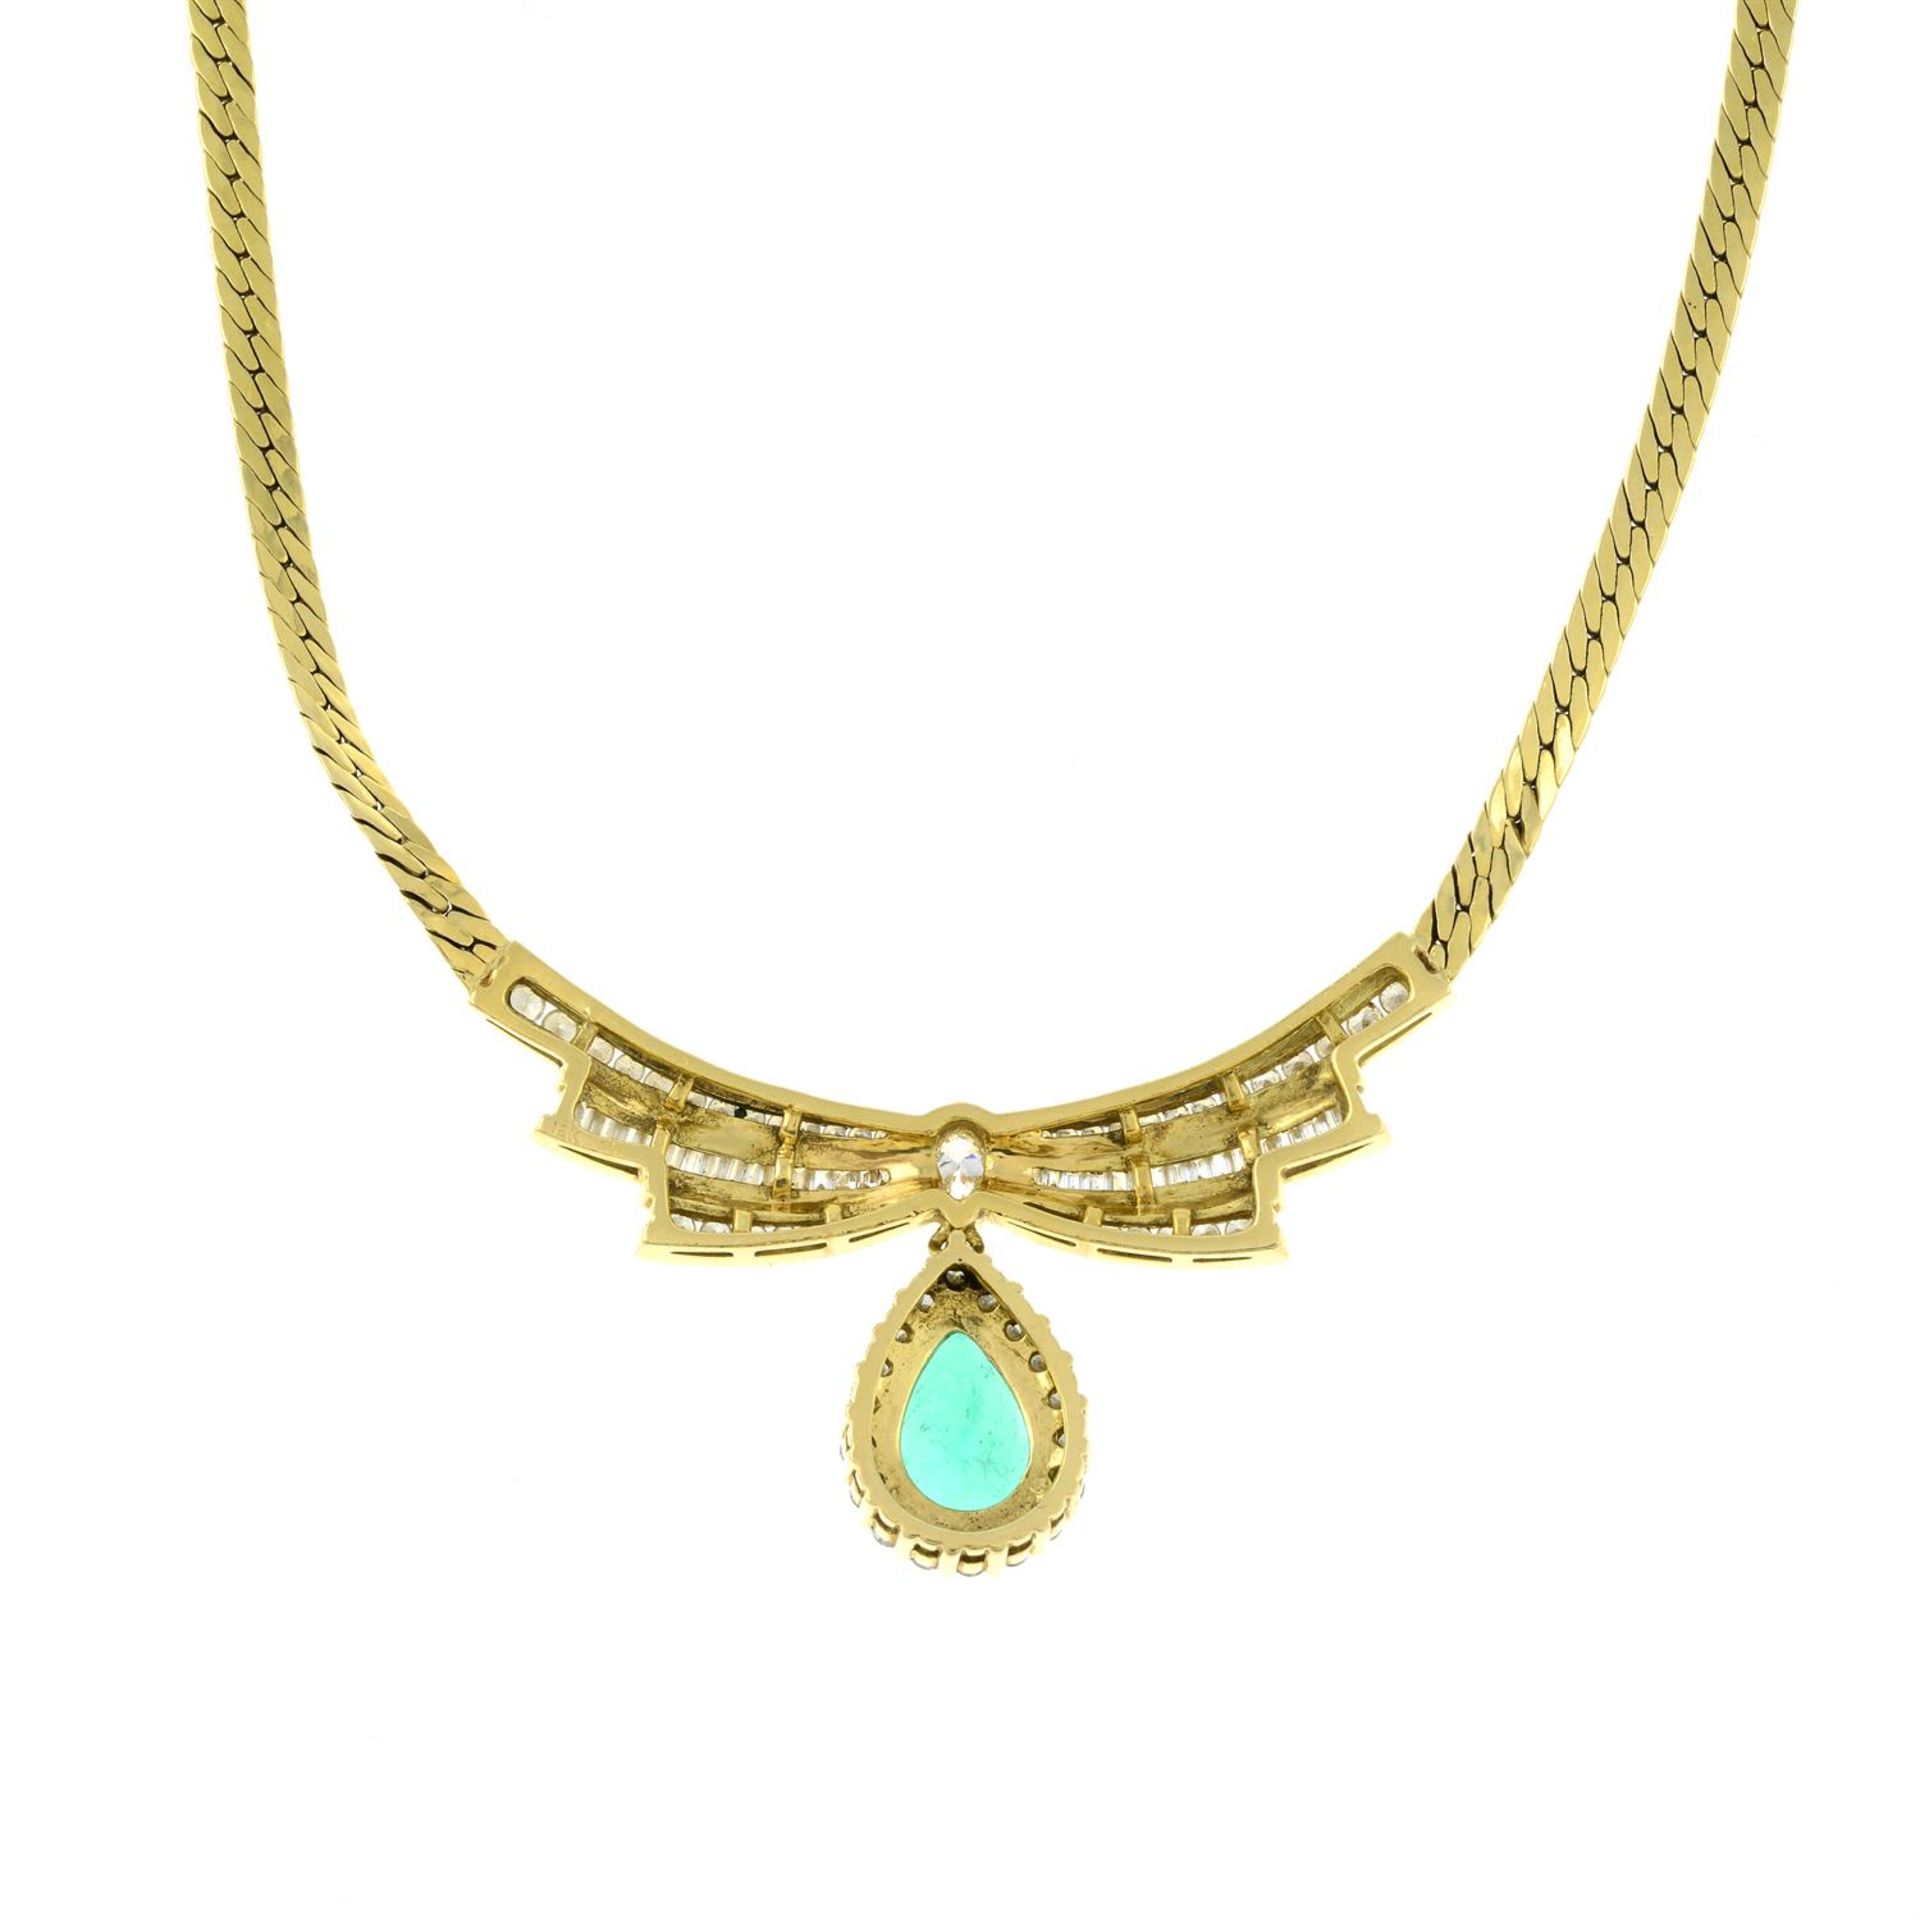 A Colombian emerald and vari-cut diamond necklace. - Image 3 of 6